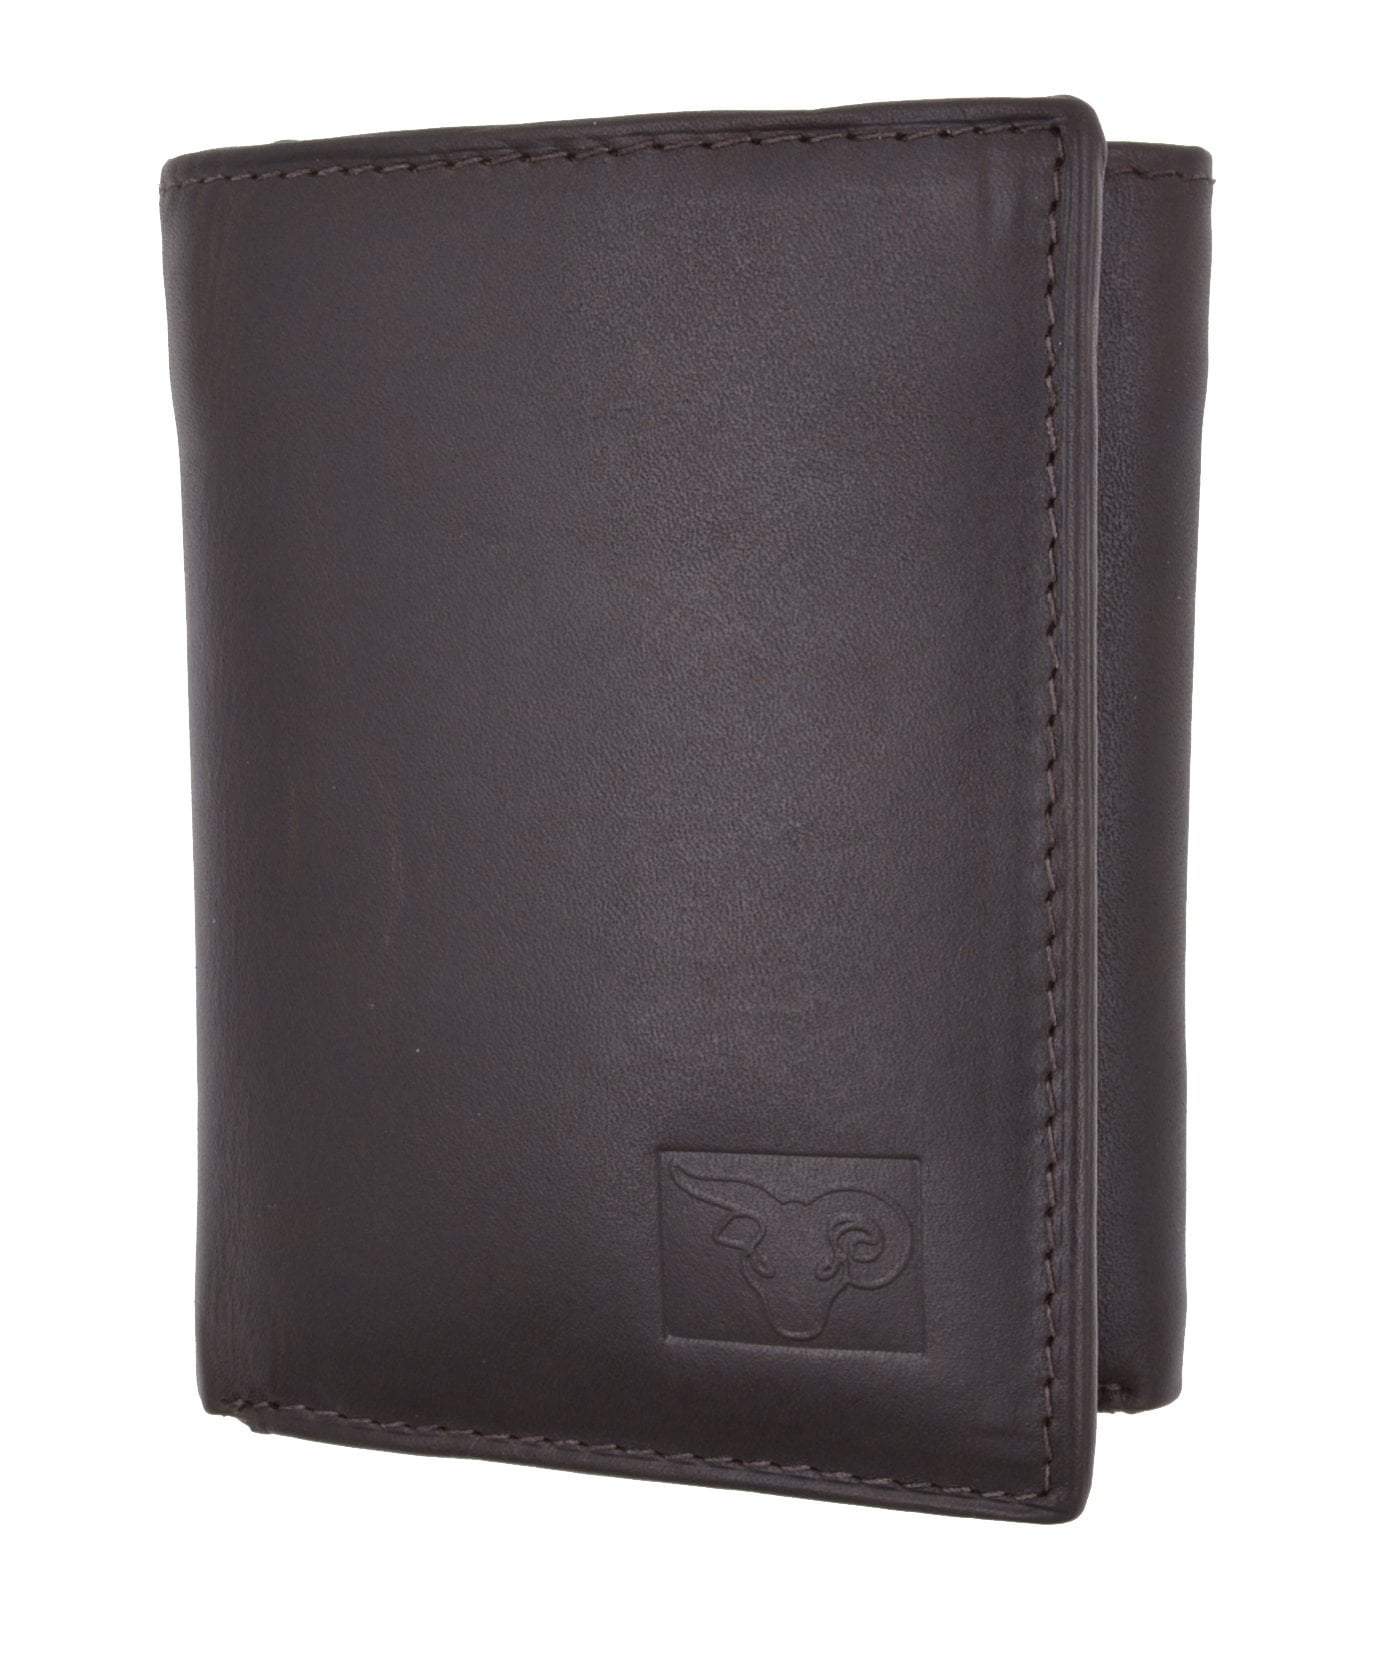 New Cavelio Mens Genuine Leather ID Card Bill Holder Trifold Wallet 731107  (C)